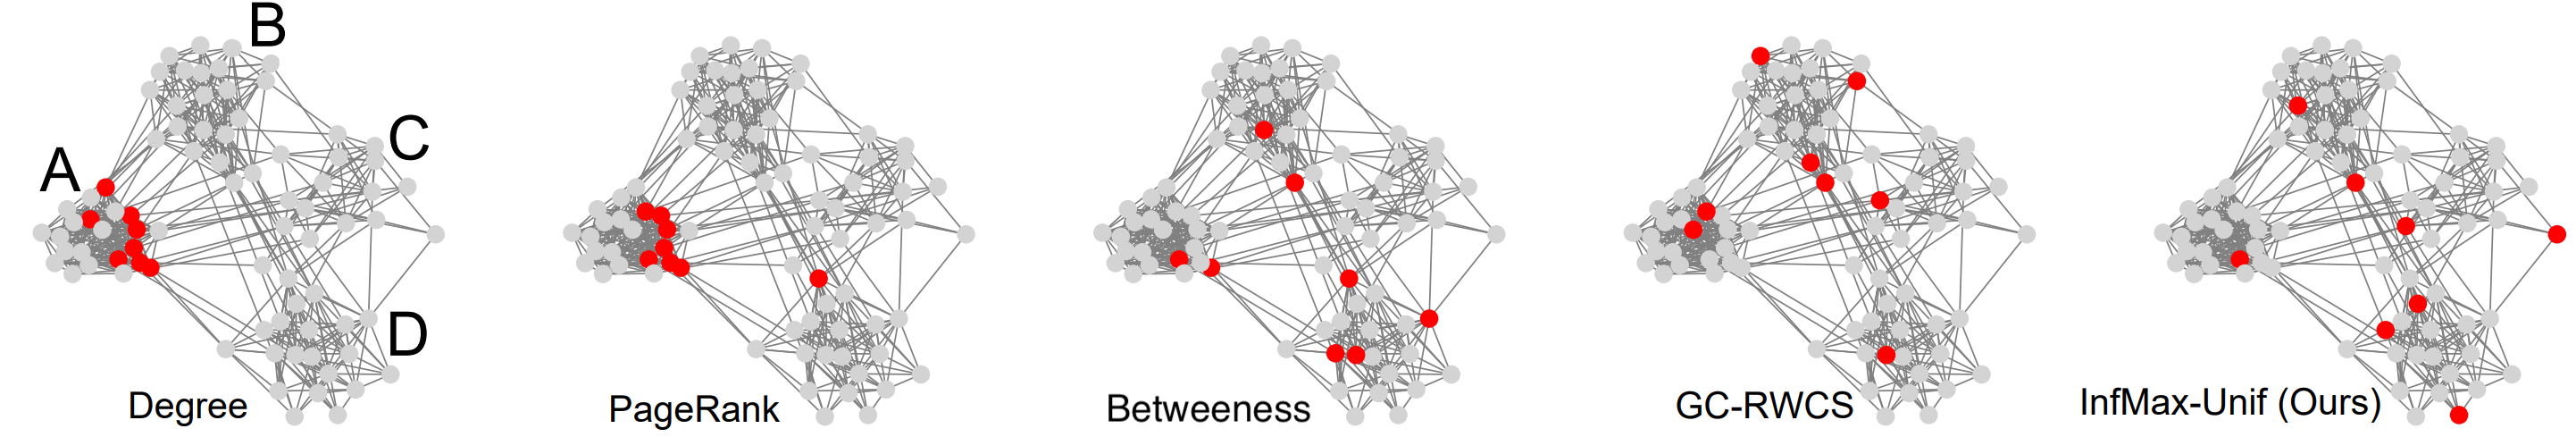 Nodes on a span different structural positions. Such a structural disparity among nodes have various implications on the graph learning models. For example, in adversarial attack, manipulating some critical nodes, compared to random selection of samples, will lead to significantly severer overall attack consequences [23], [24].